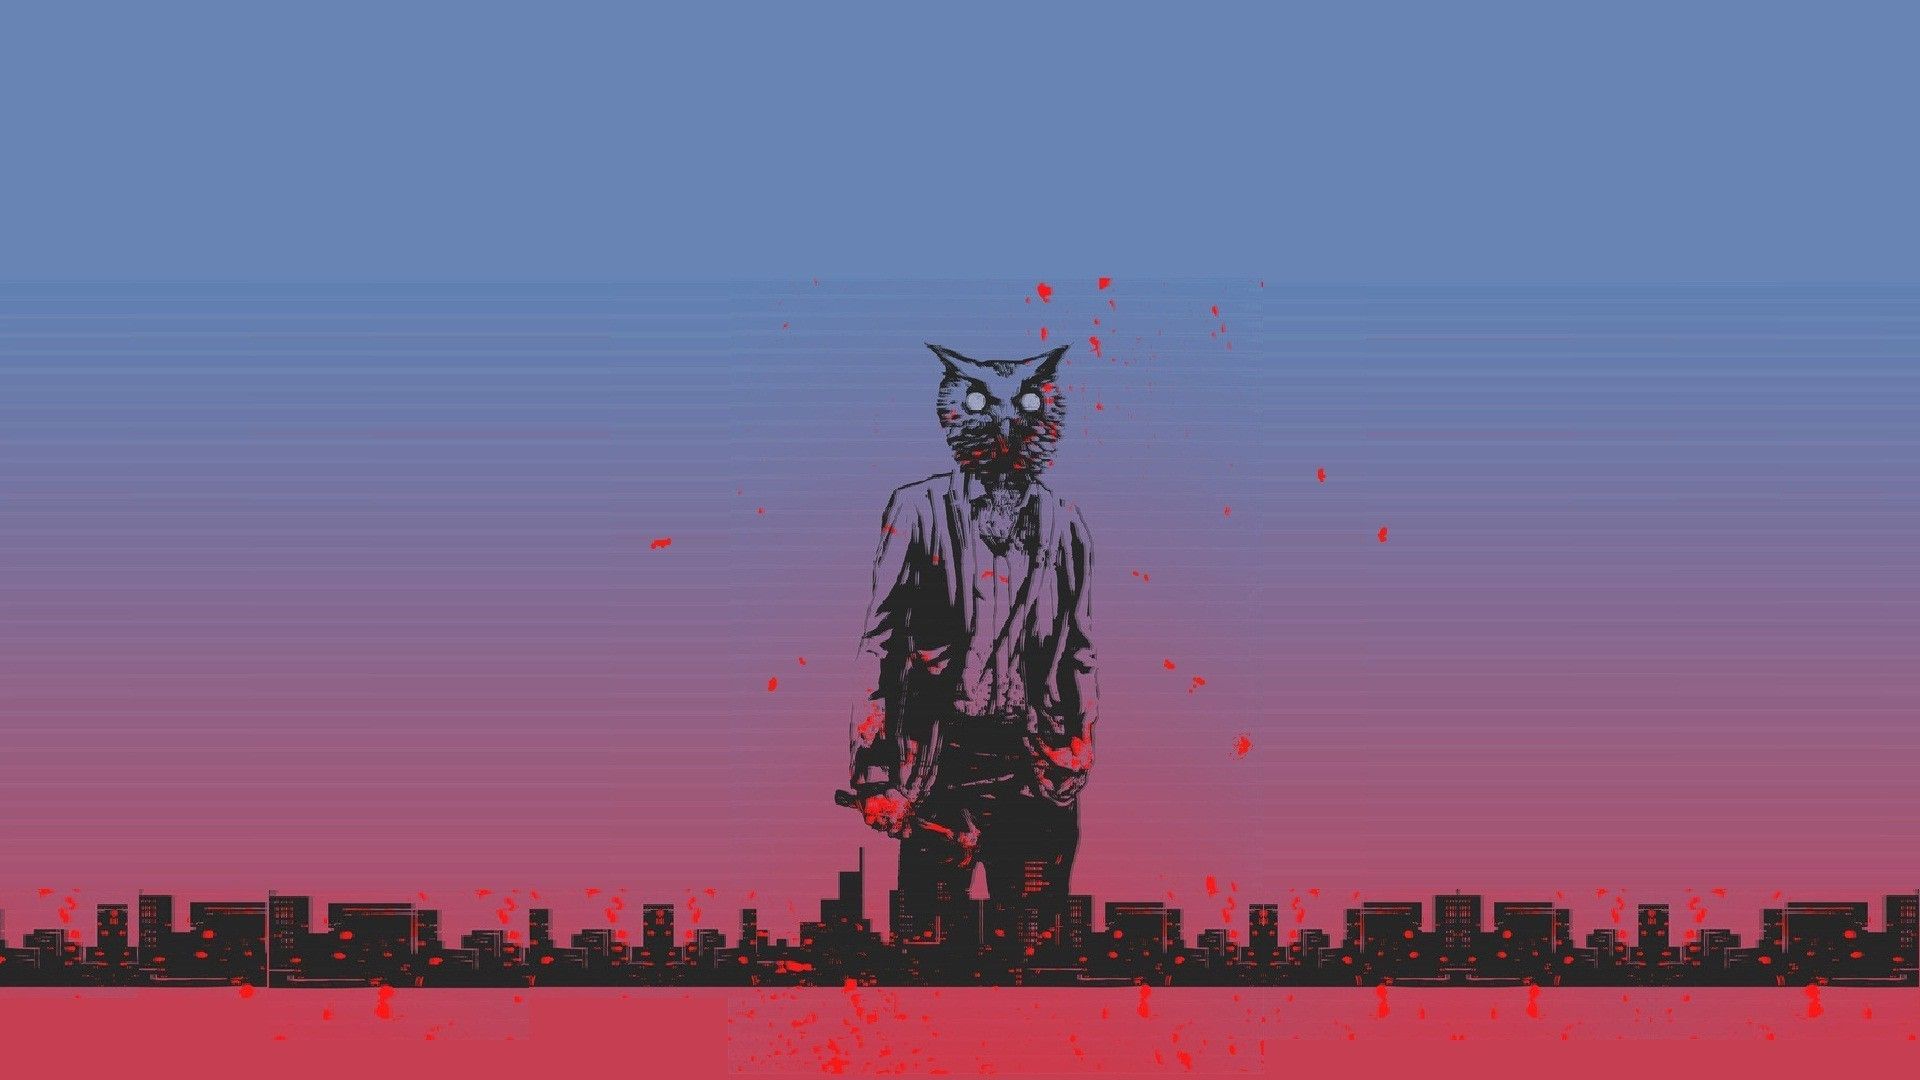 A man with a cat's head and a knife stands in front of a cityscape - Miami